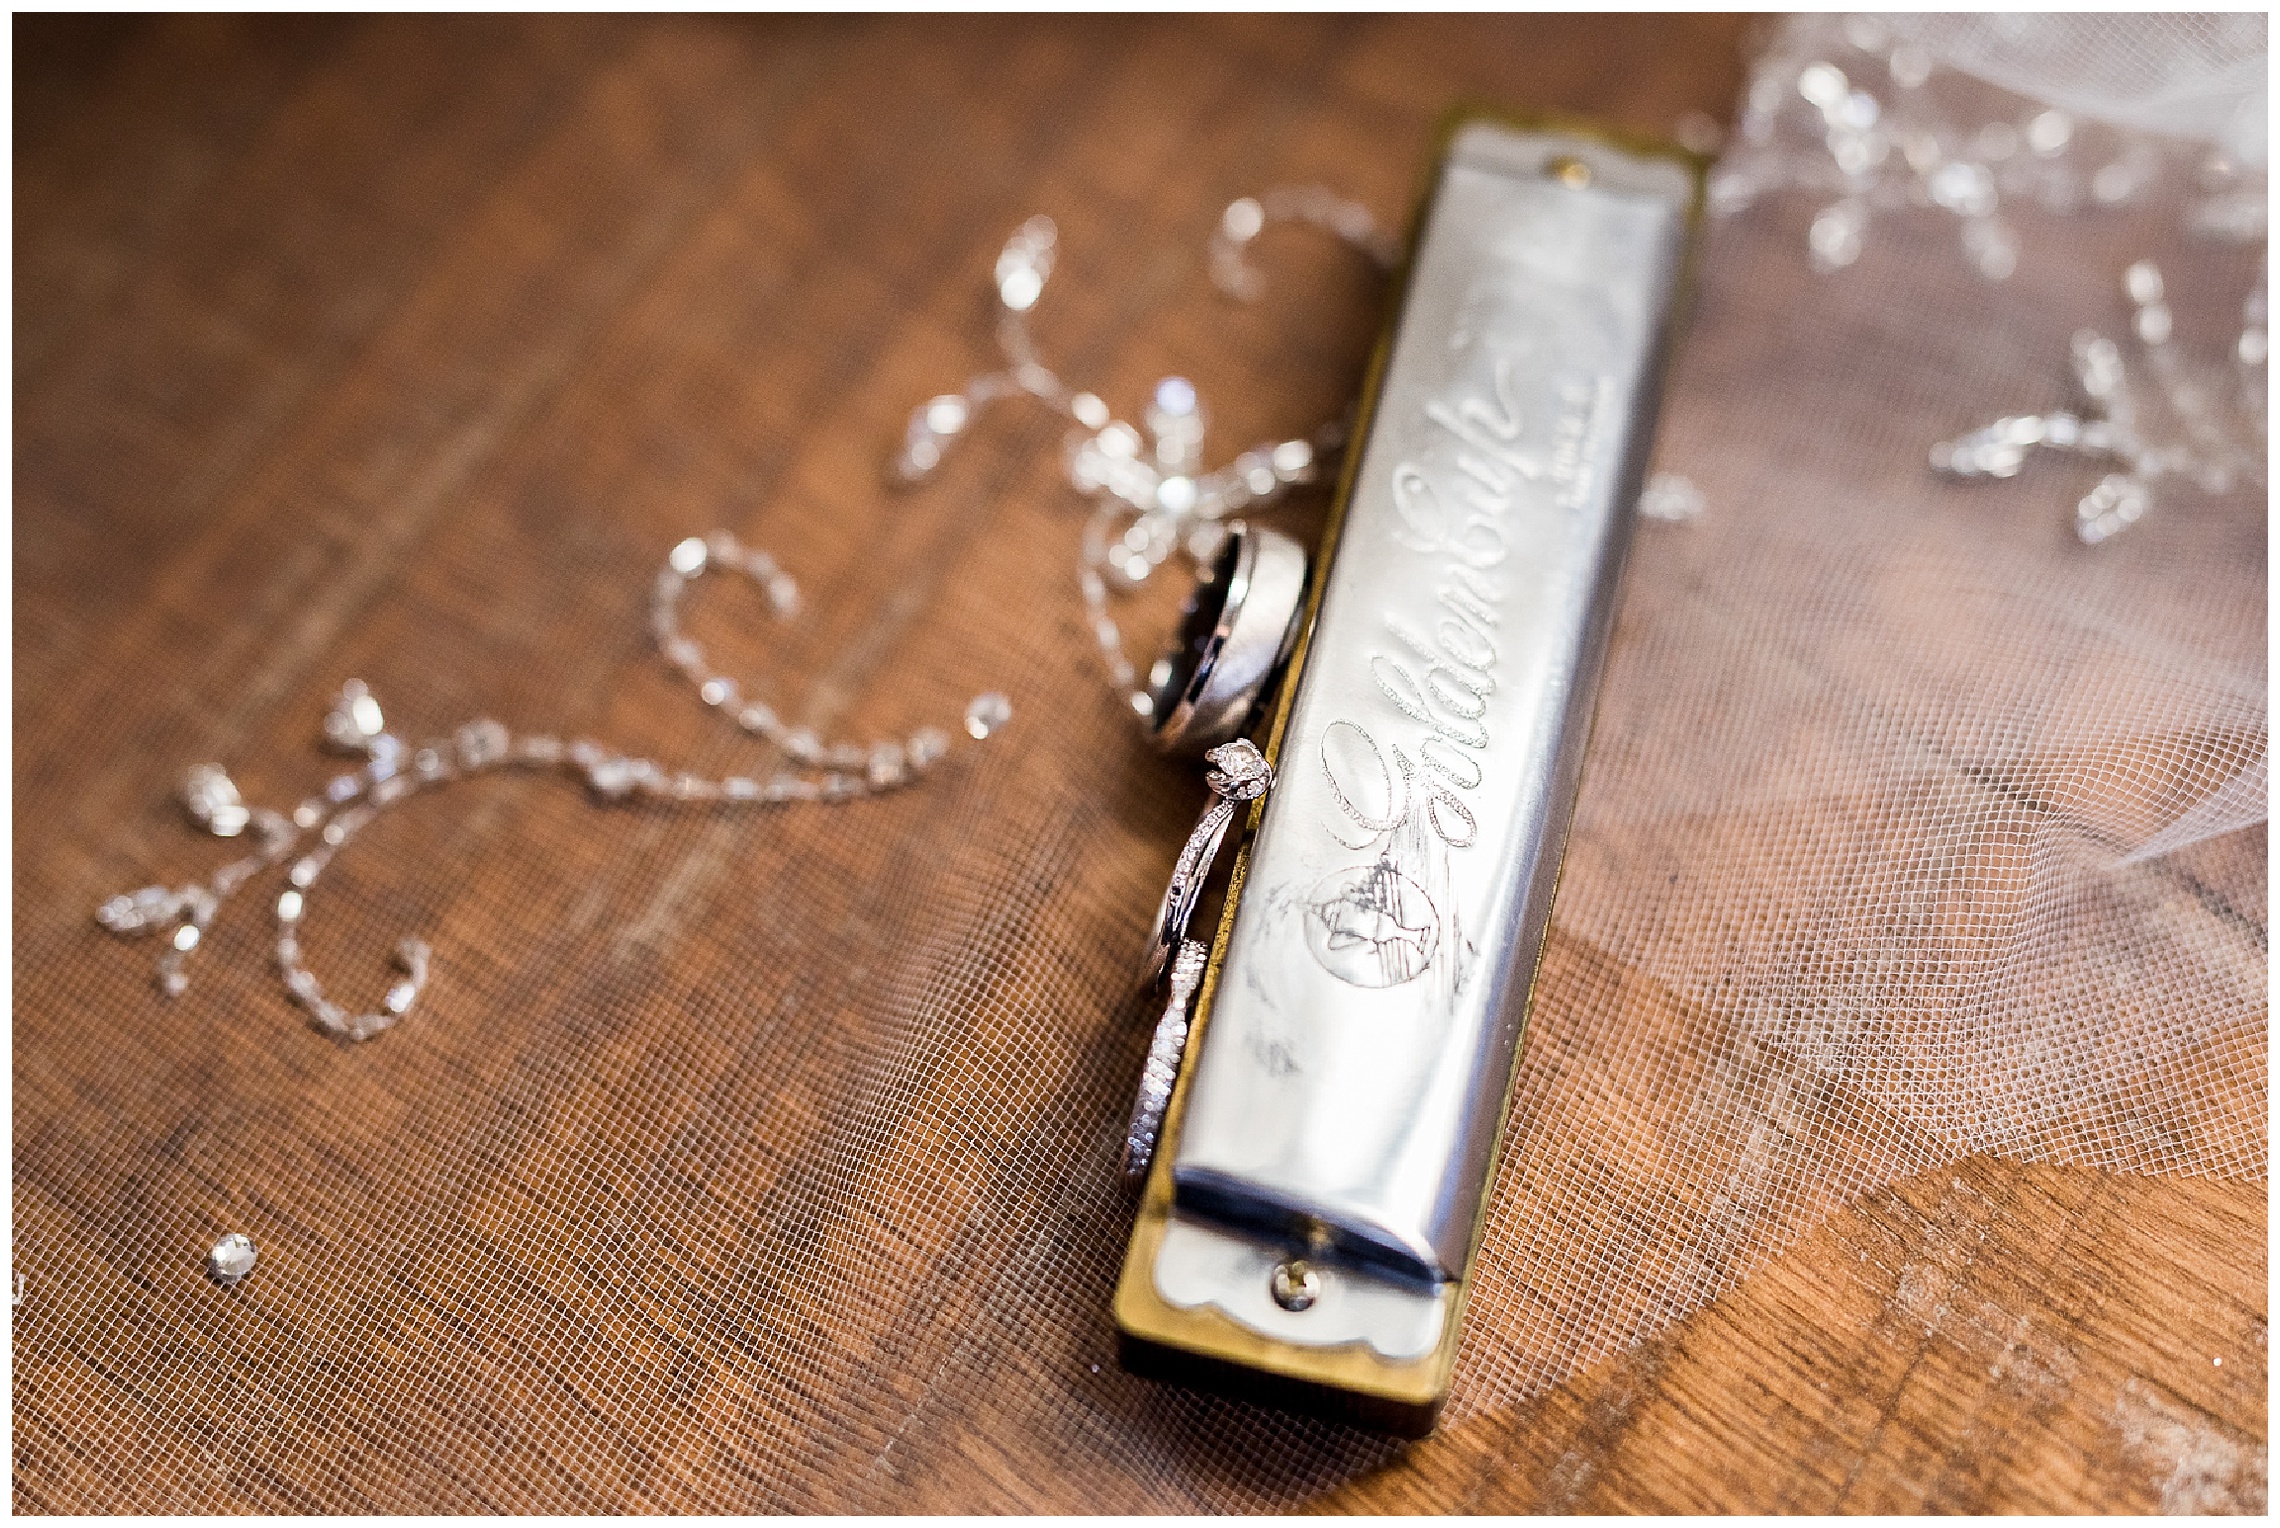 wedding rings with veil and silver harmonica